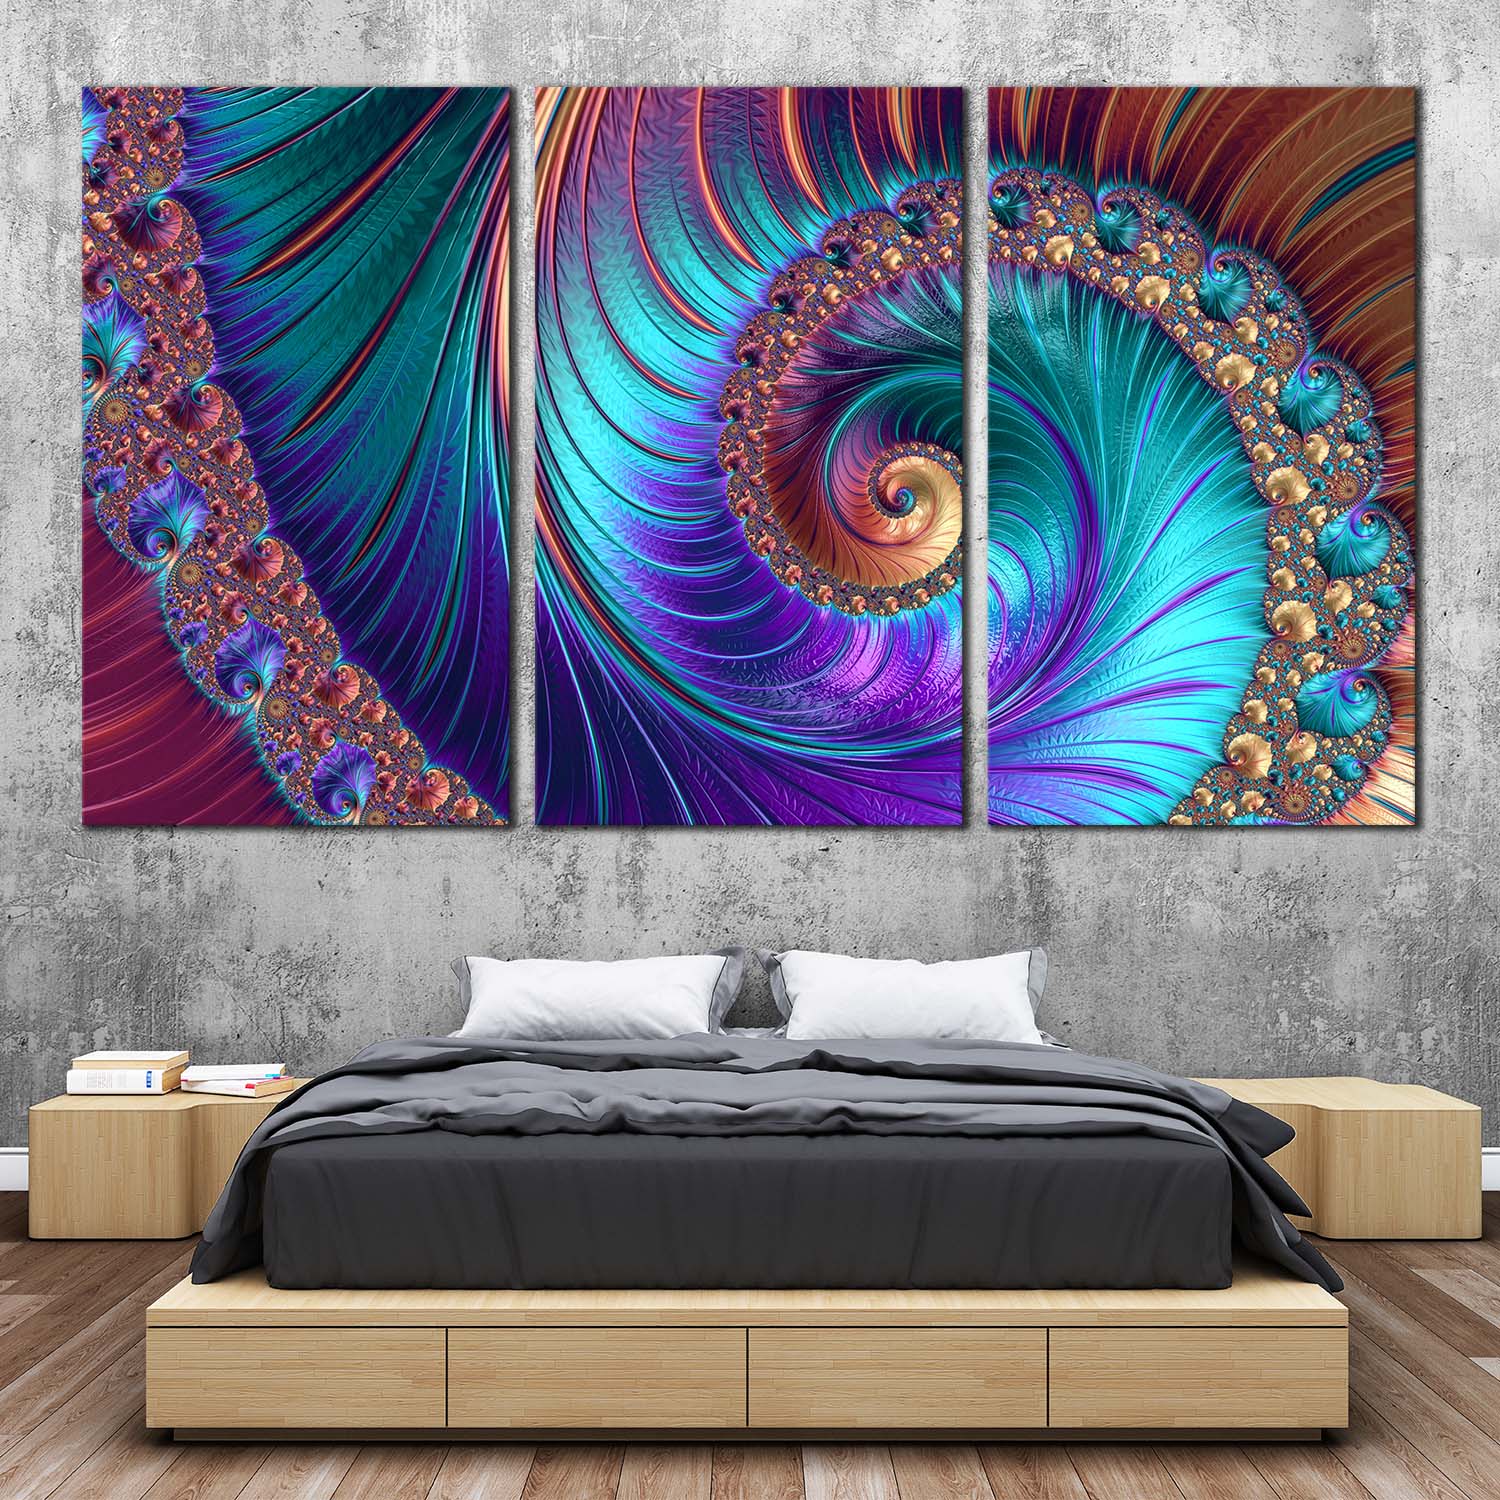 Abstract Infinity Canvas Wall Art, Colorful Abstract Swirl 3 Piece Can ...